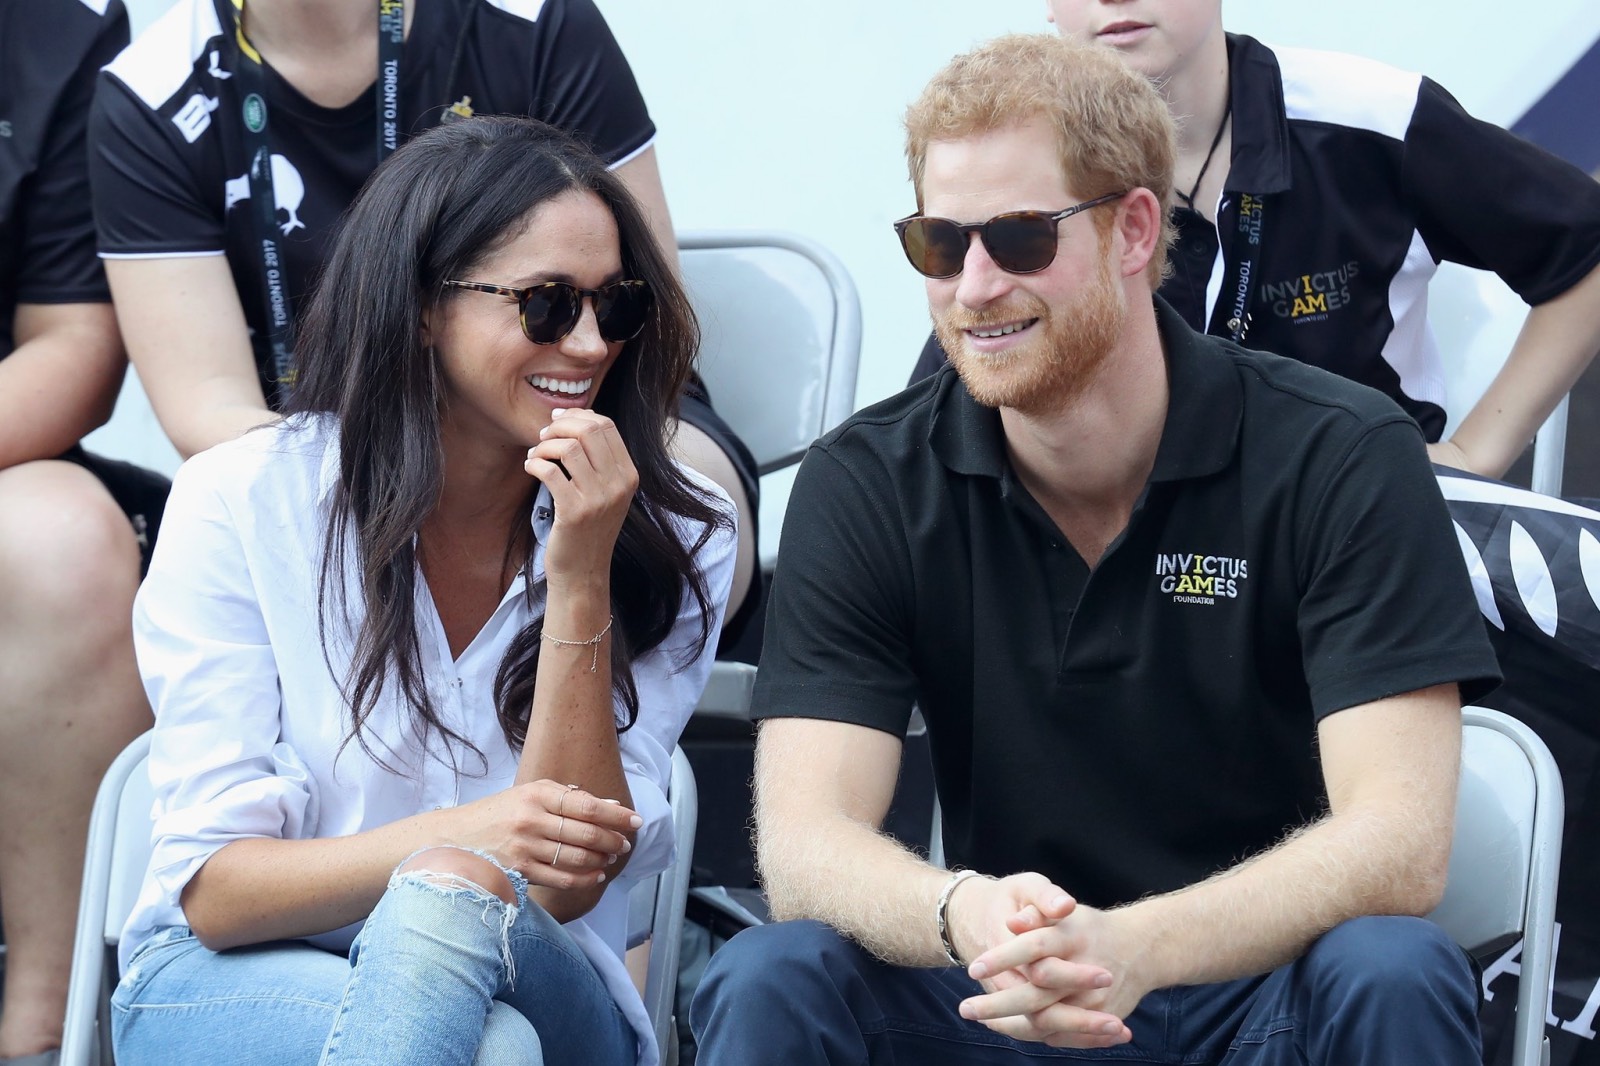 Britain's Prince Harry and American actor Meghan Markle